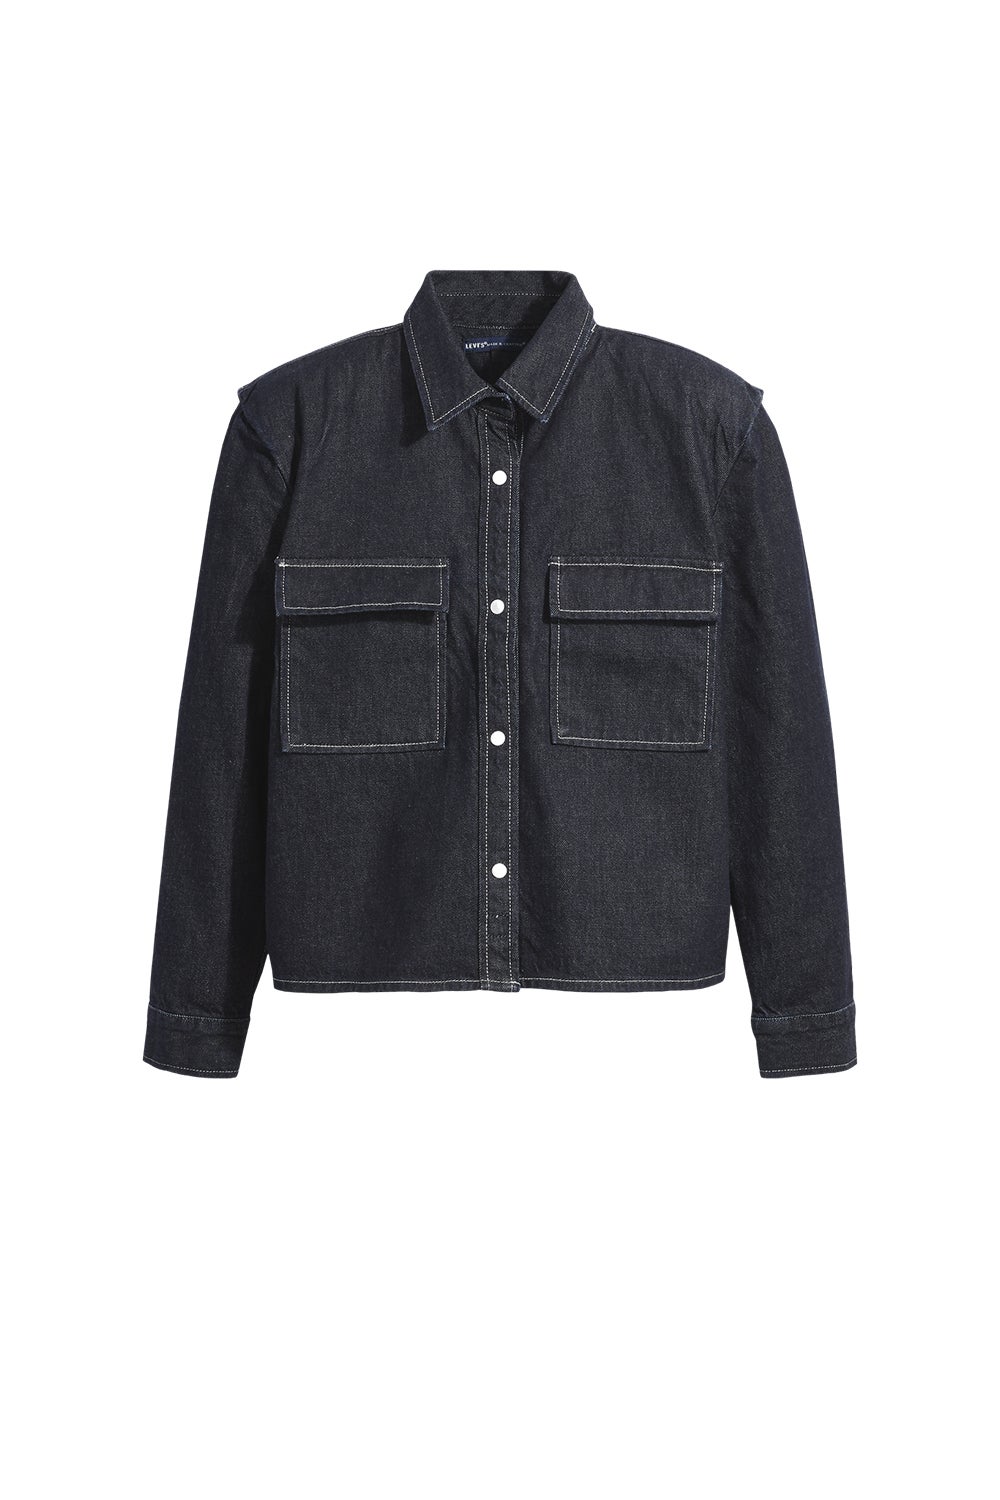 Levi's Made and Crafted Bold Shoulder Shirt